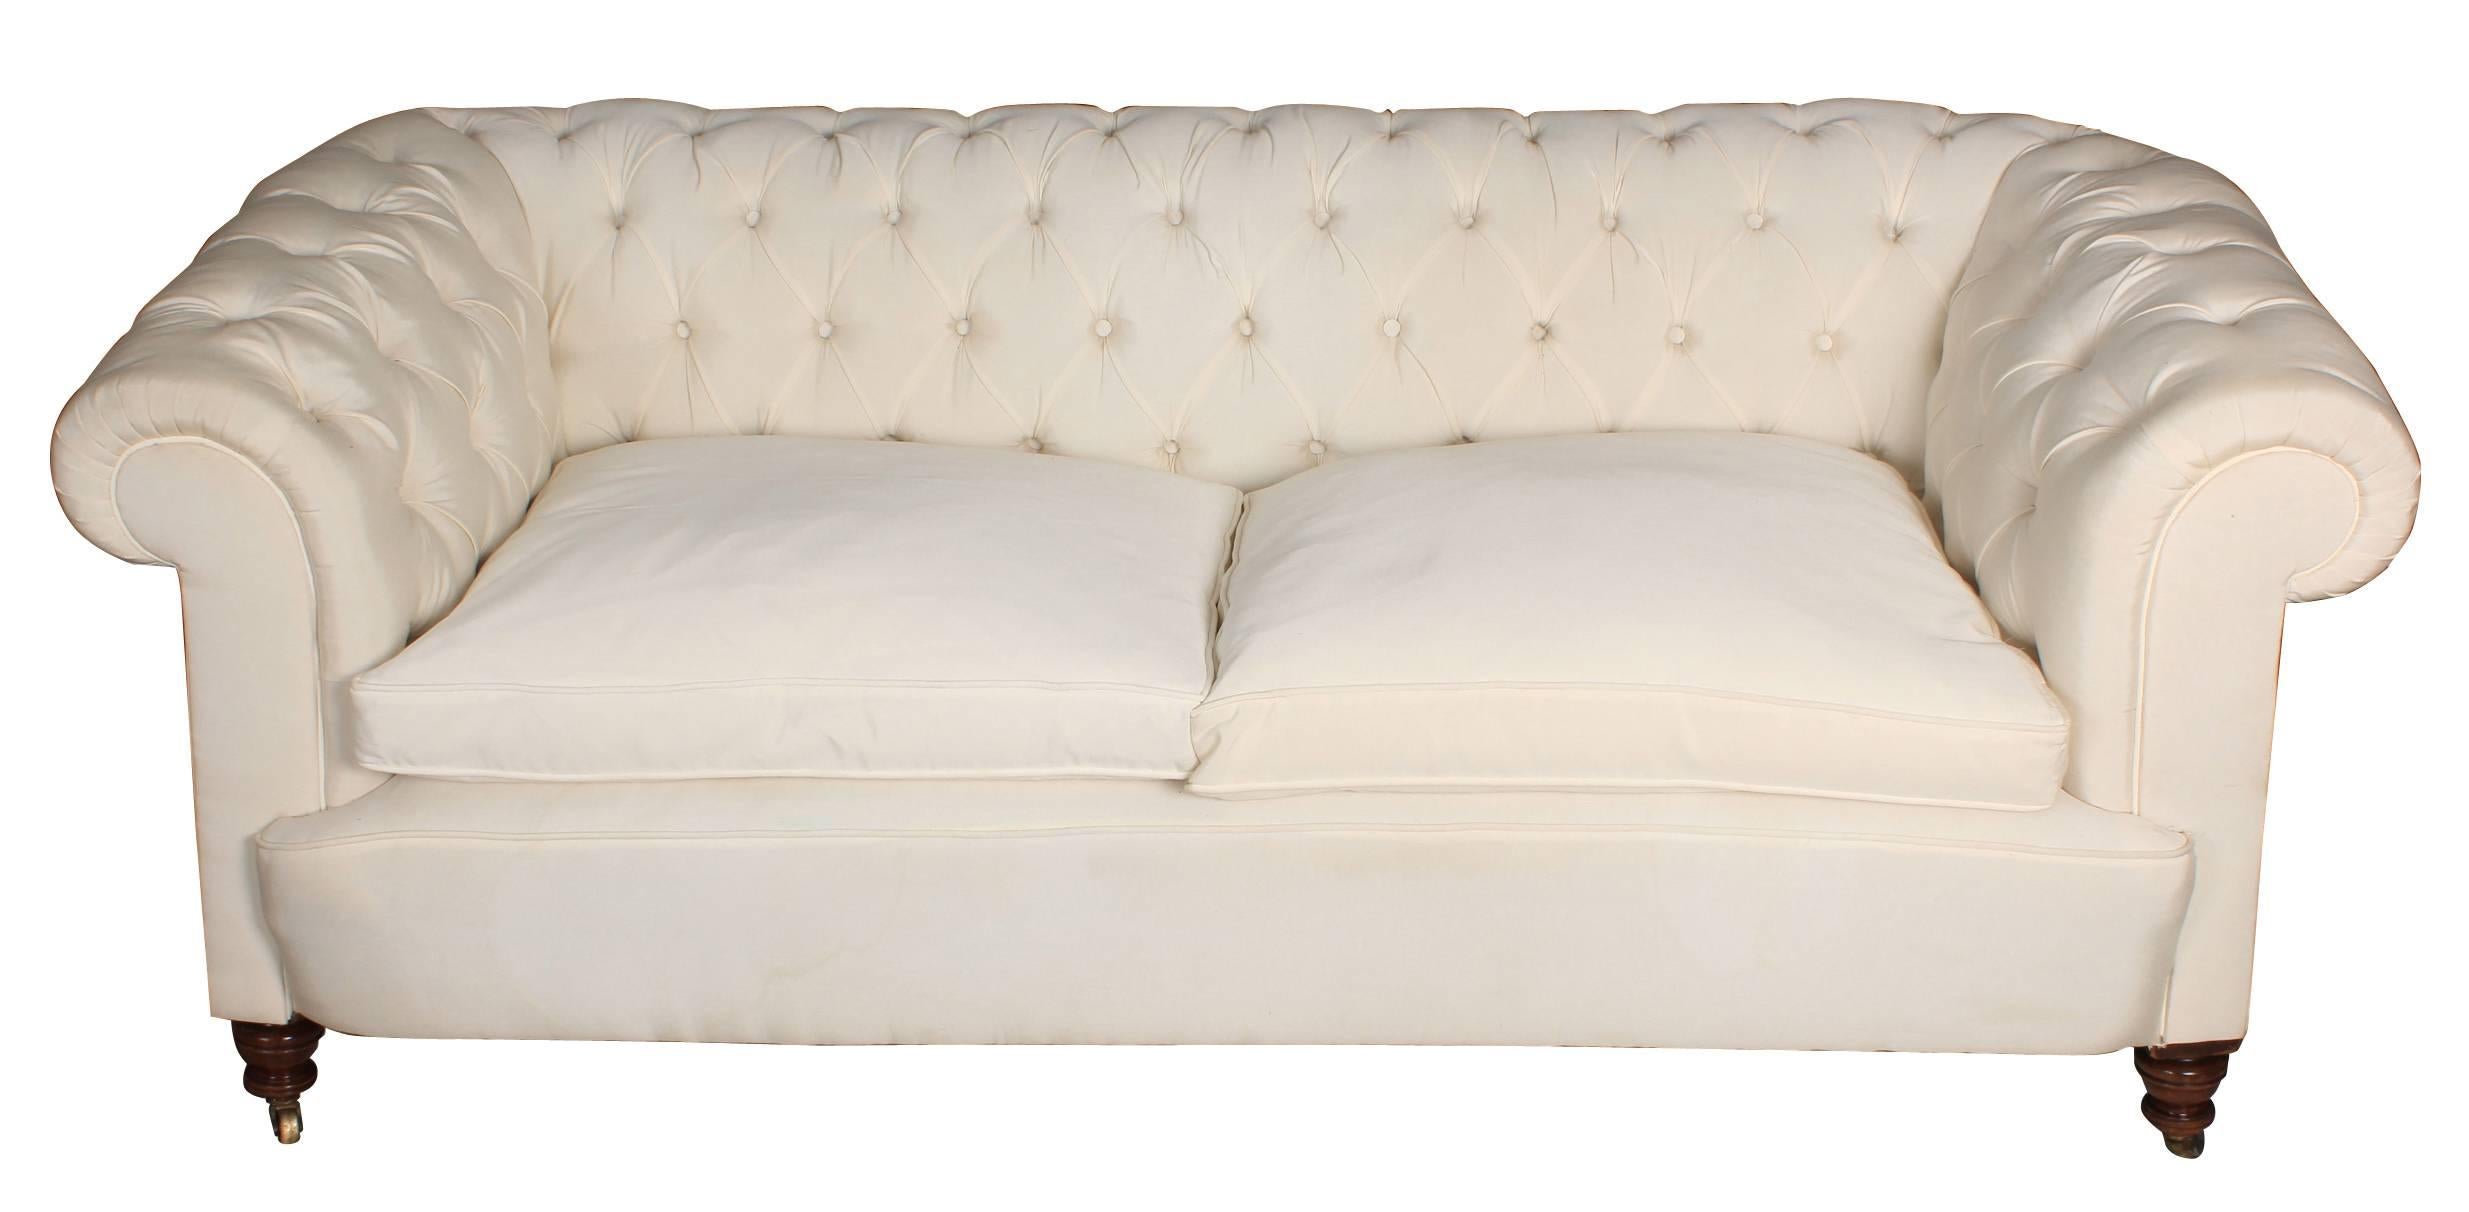 English Victorian Chesterfield Sofa For Sale